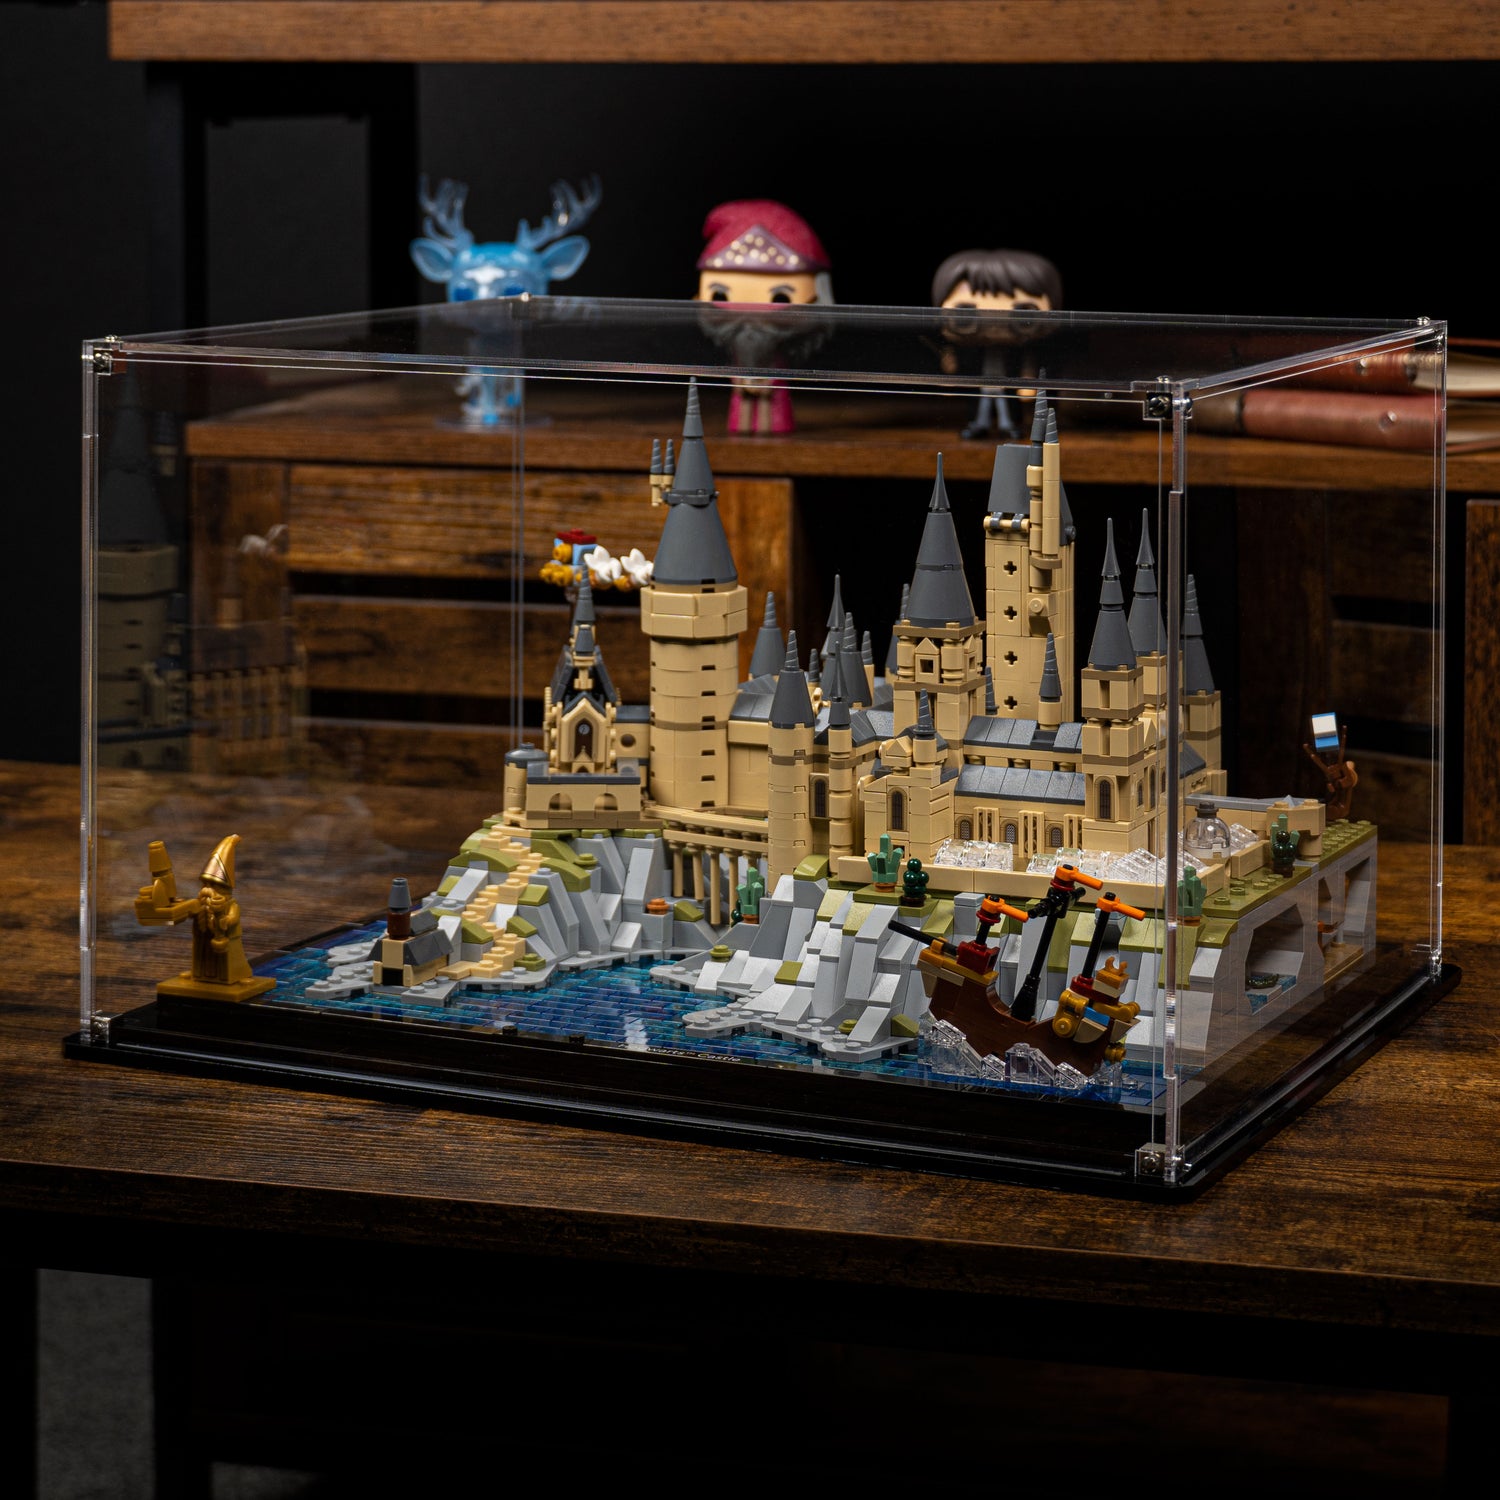 Protect the castle with shields of crystal clear Perspex® acrylic.